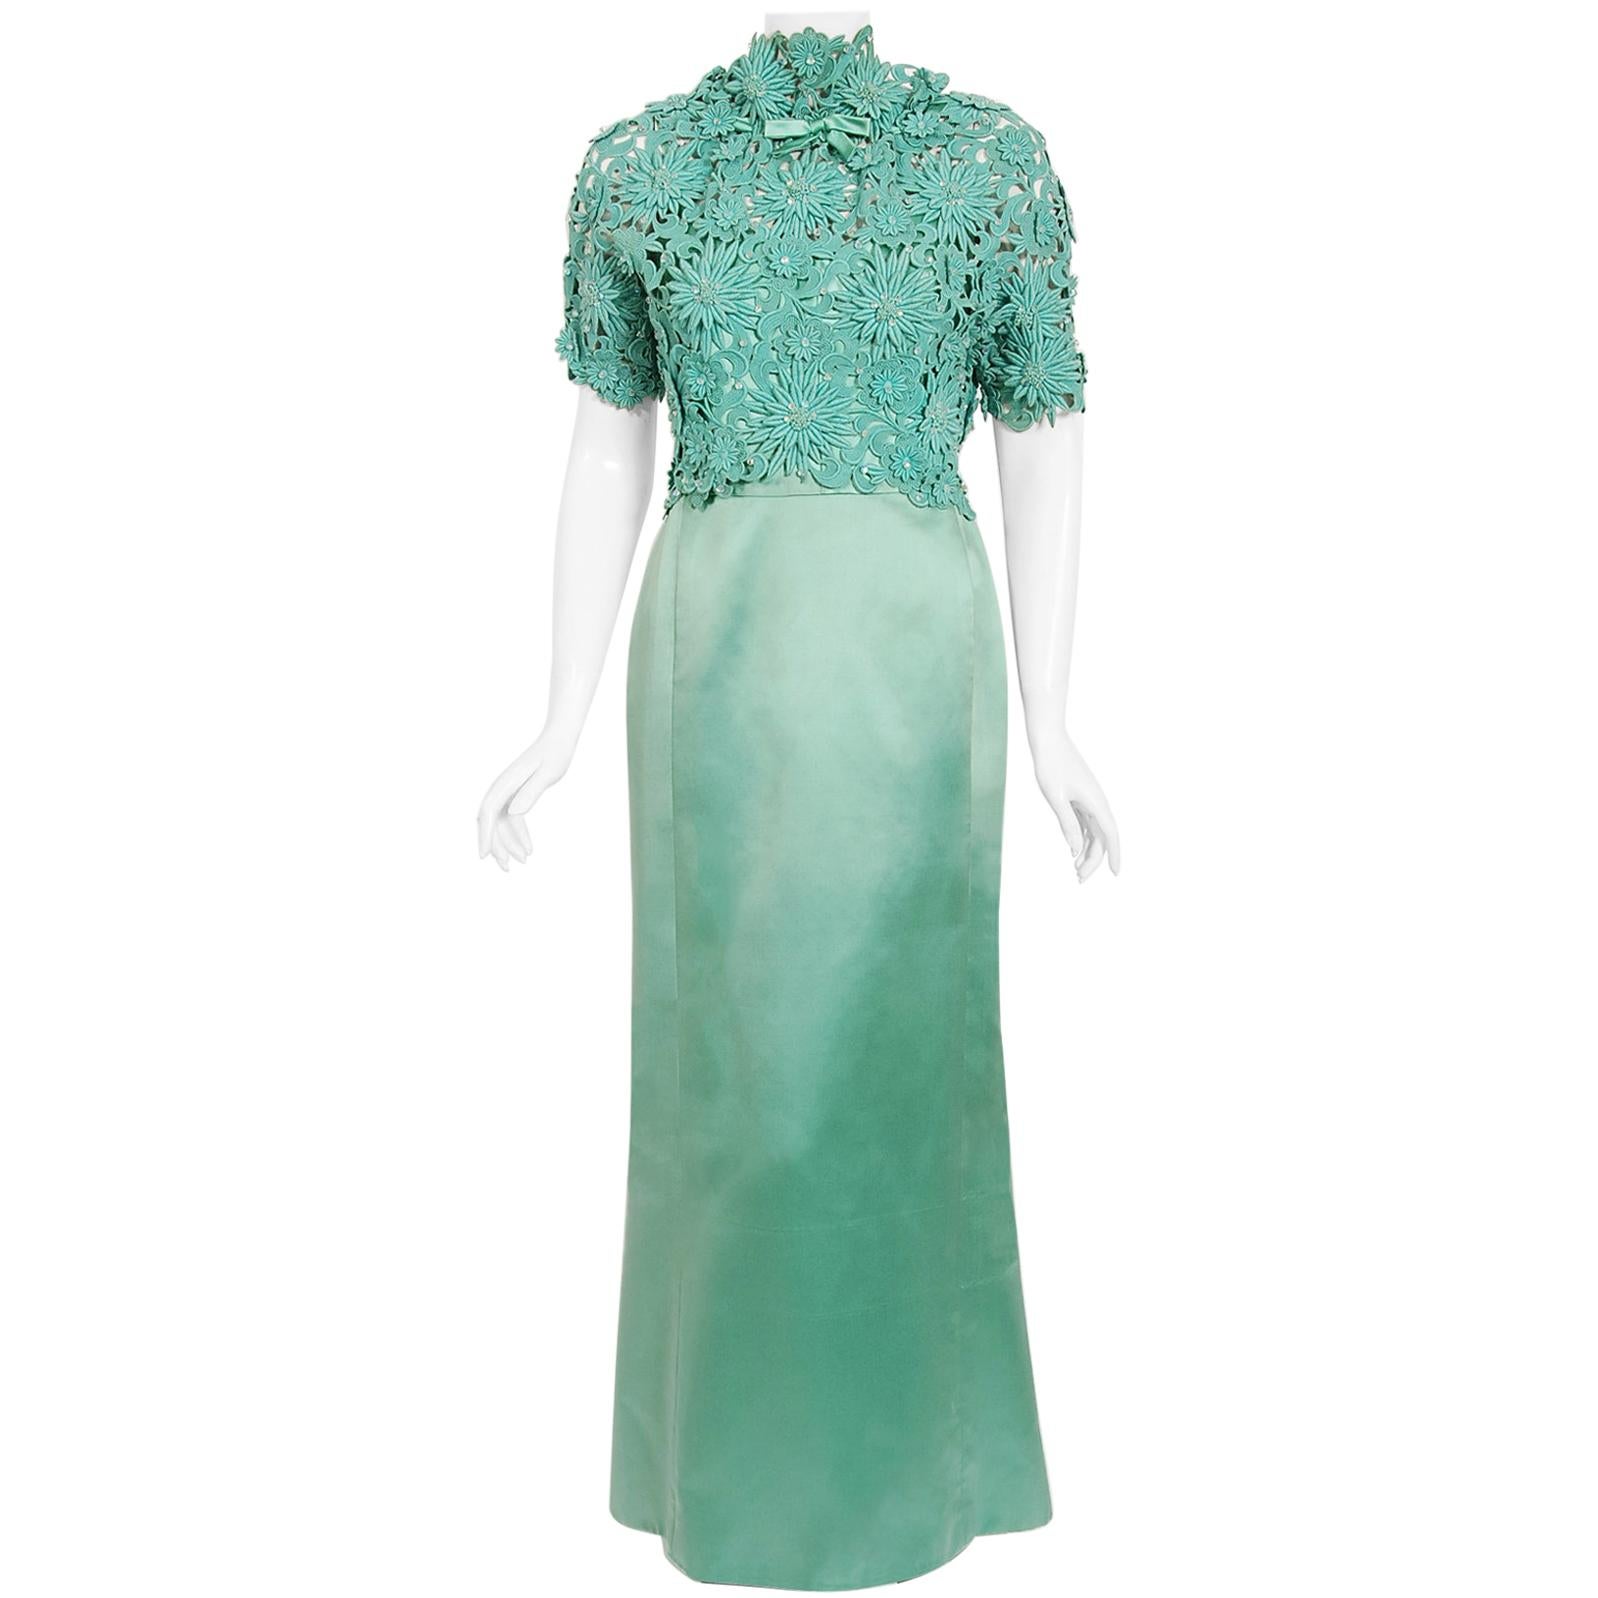 Vintage 1962 Nina Ricci Couture Seafoam Blue Green Beaded Lace Satin Fitted Gown